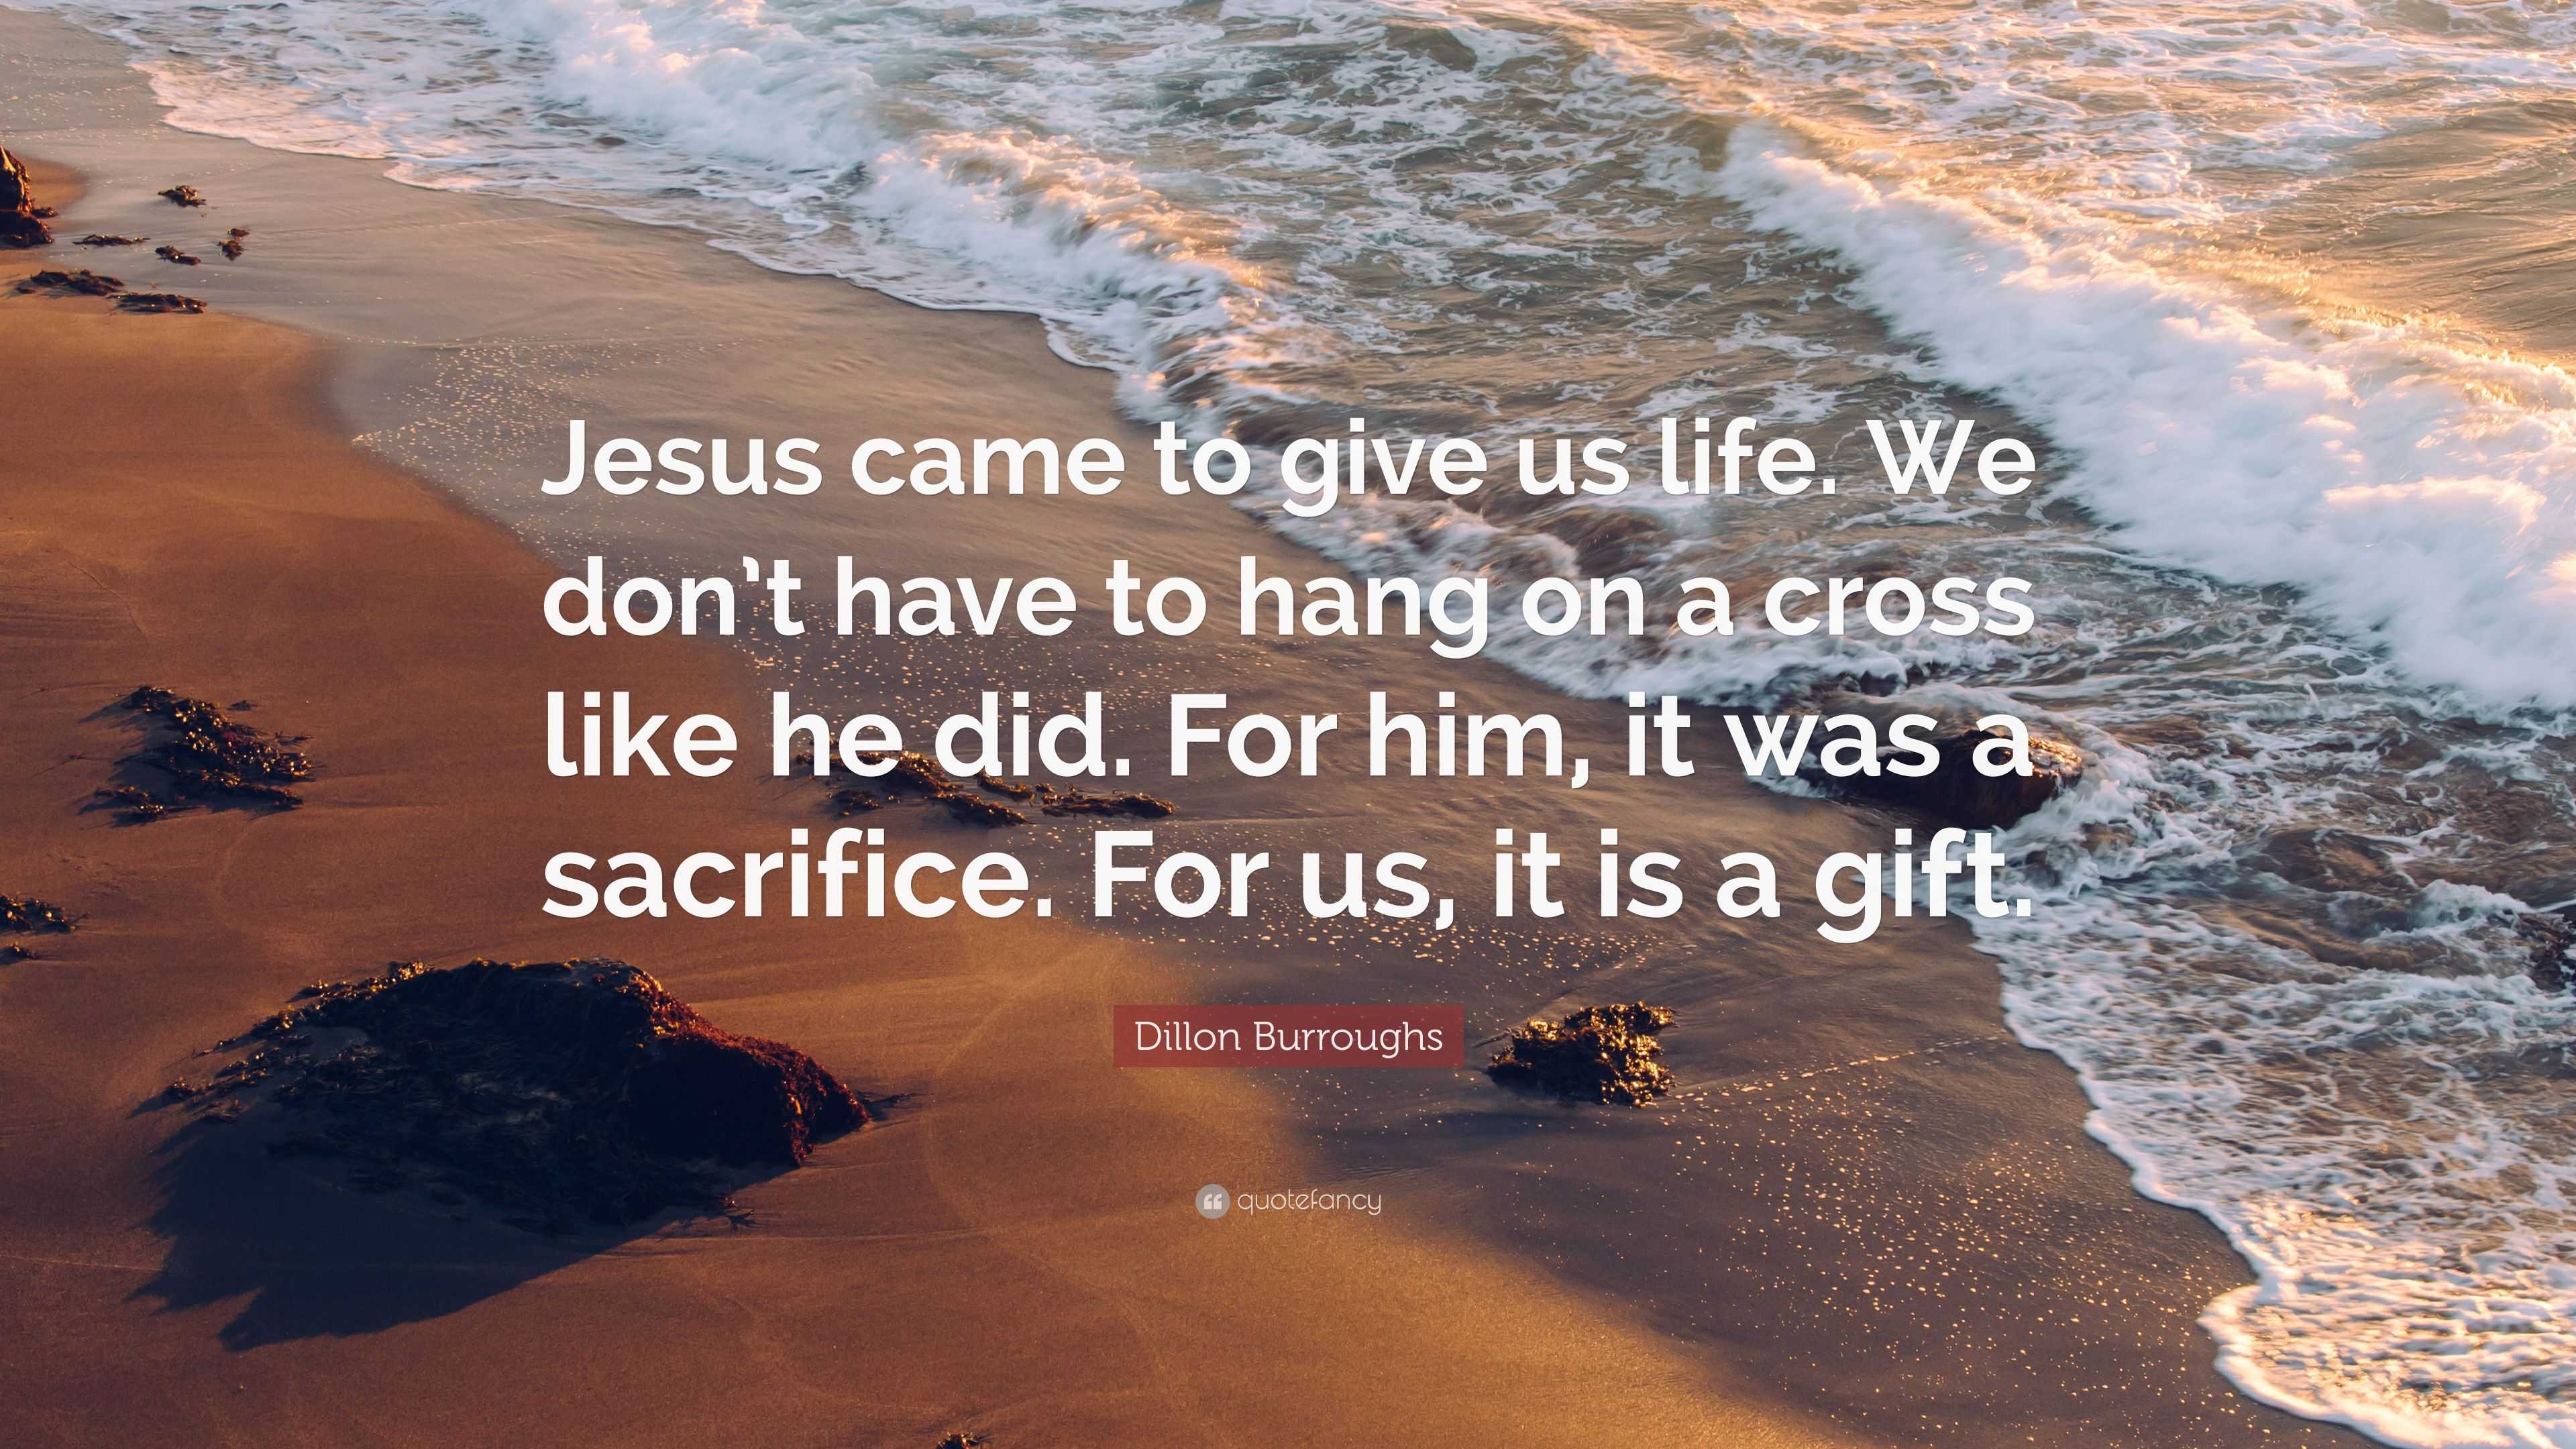 Dillon Burroughs Quote: “Jesus came to give us life. We don’t have to ...